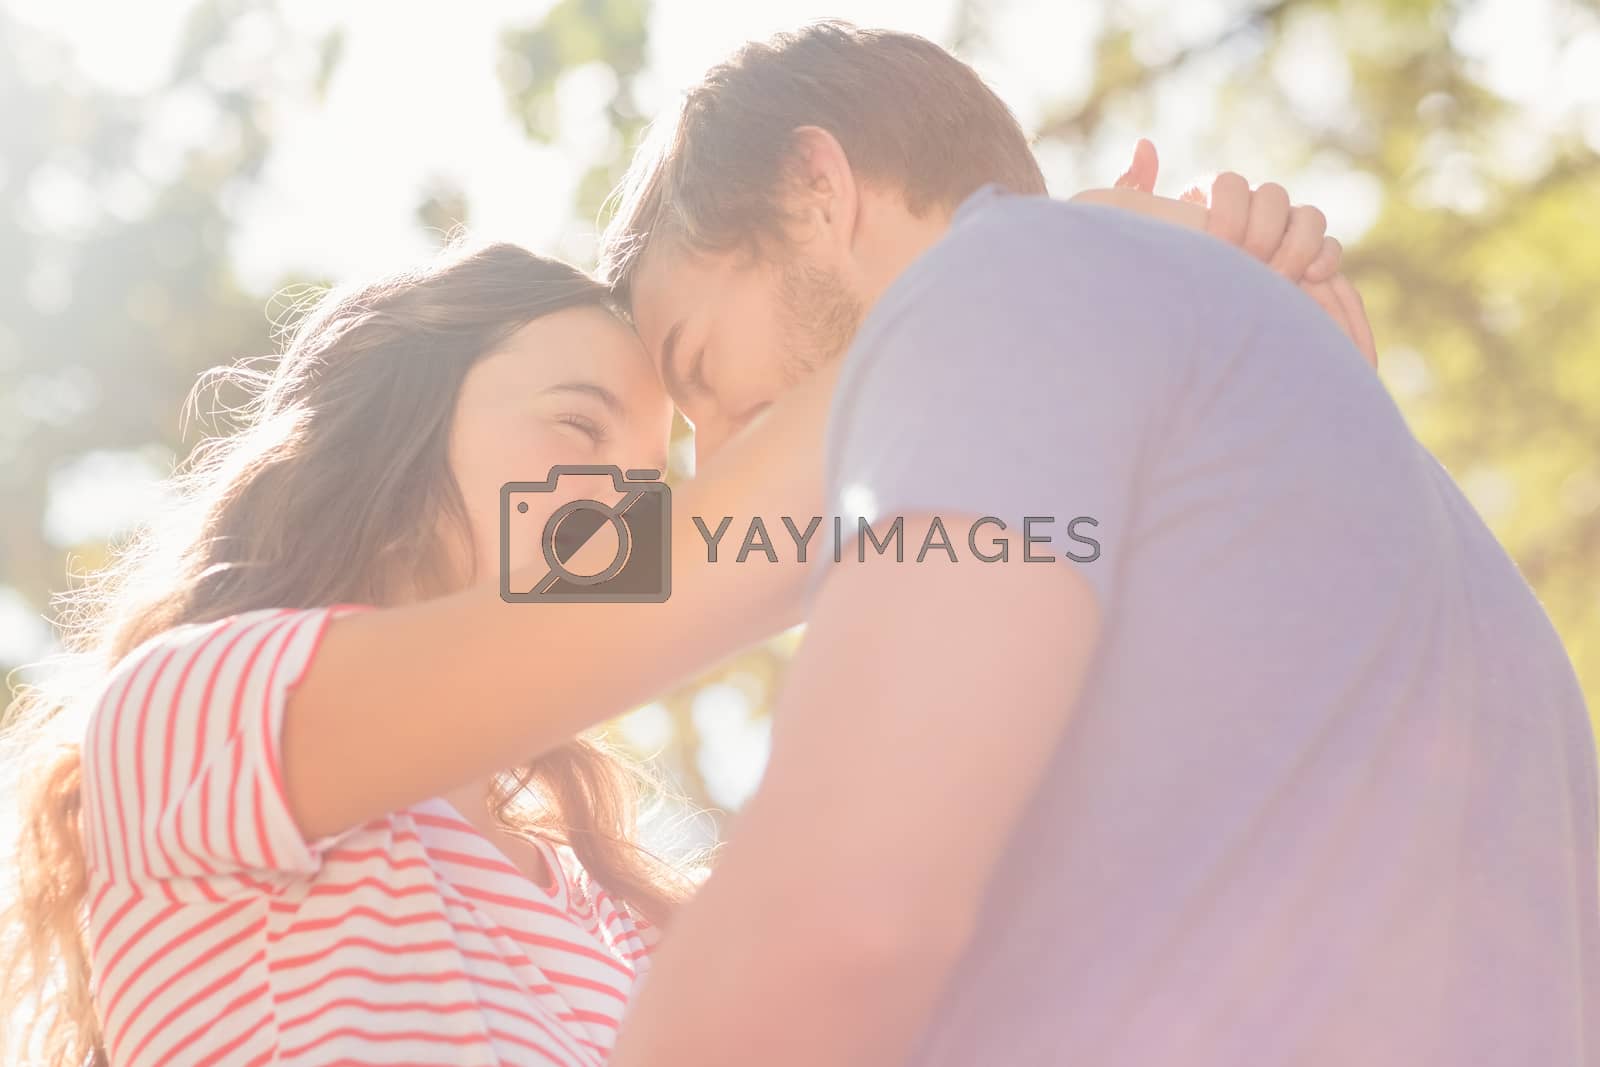 Royalty free image of Cute coupe smiling at each other in park  by Wavebreakmedia